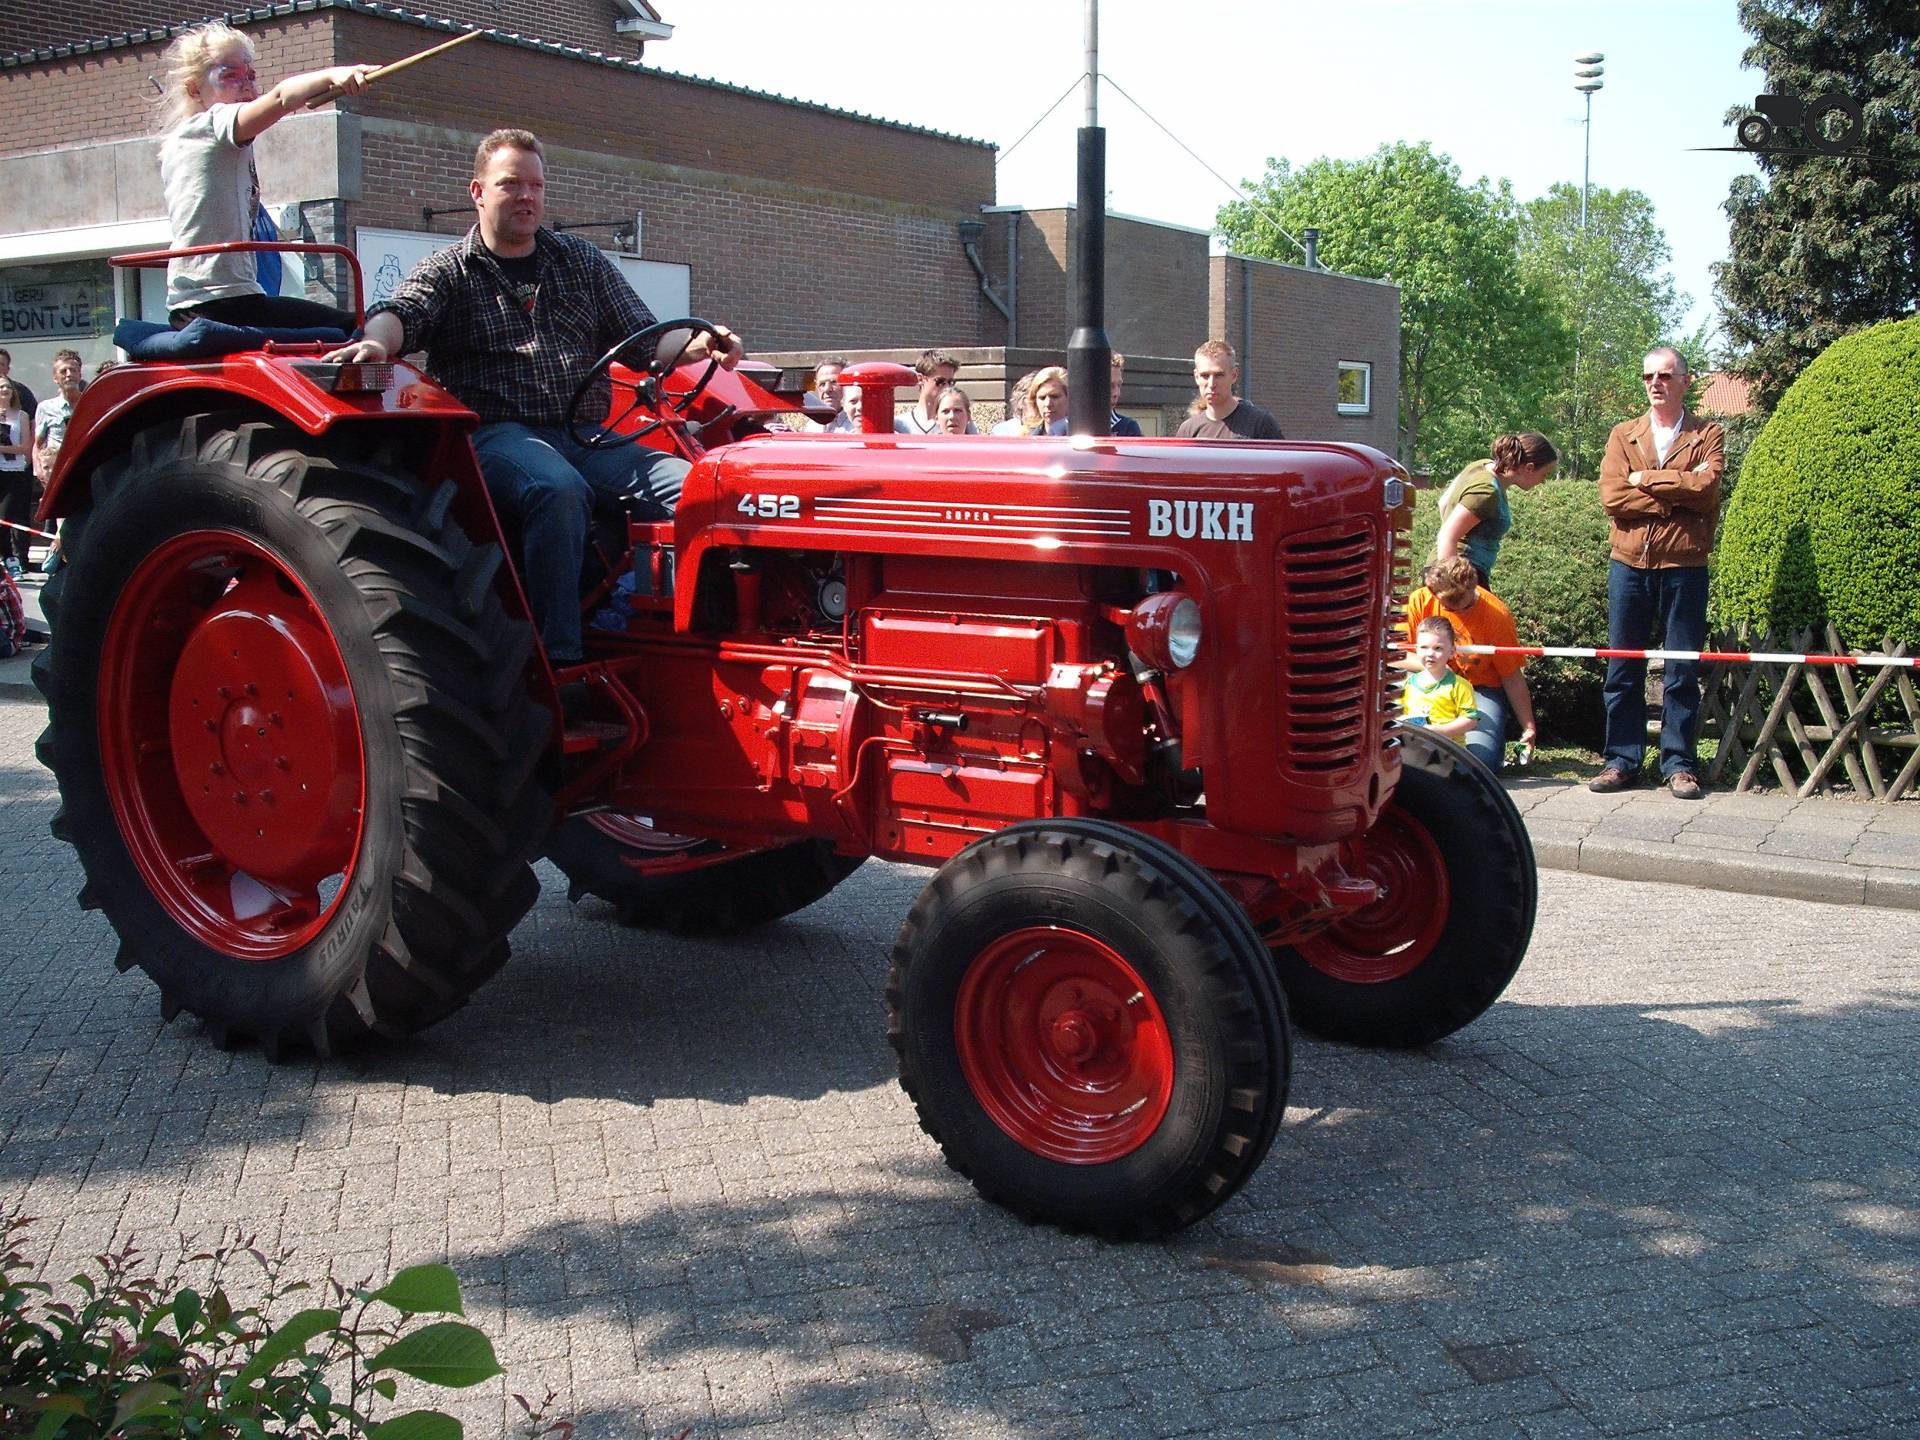 Bukh 452 Tractor Picture